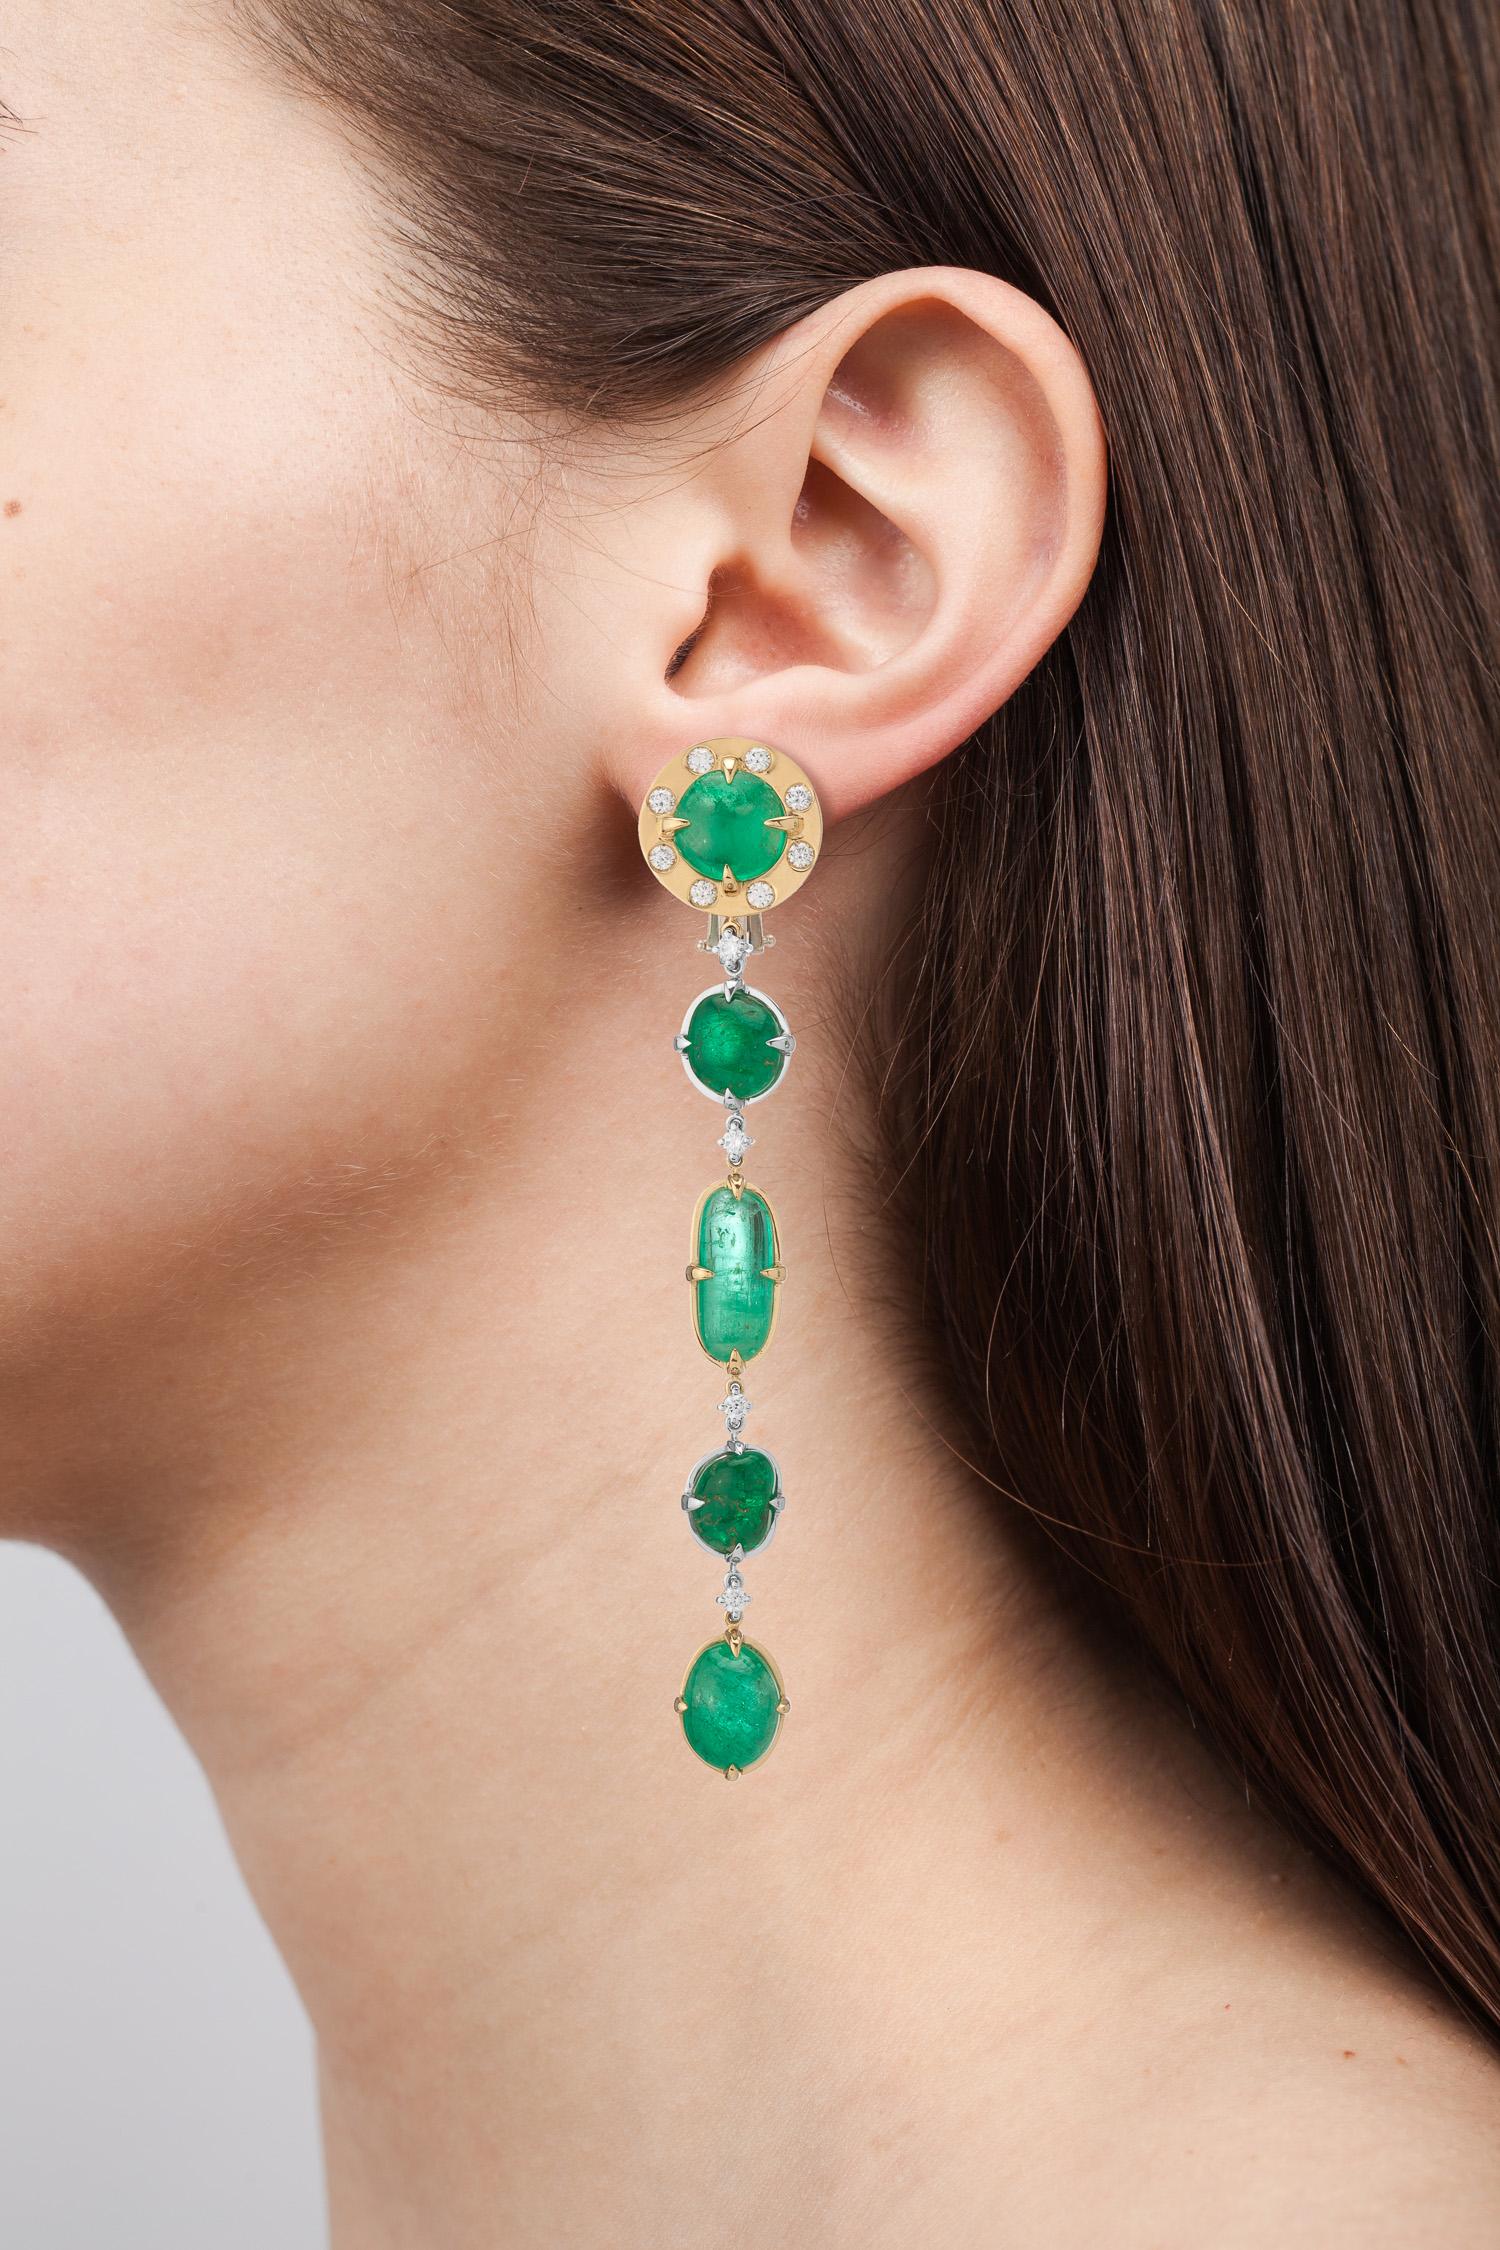 18 Karat yellow and white gold long drop earrings featuring different shapes of Muzo Colombian emeralds weighing 34.85 carats and gypsy set diamonds weighing 0.81 carats. 

Muzo Emerald Colombia Heritage Muisca Earrings set with 34.85 carats